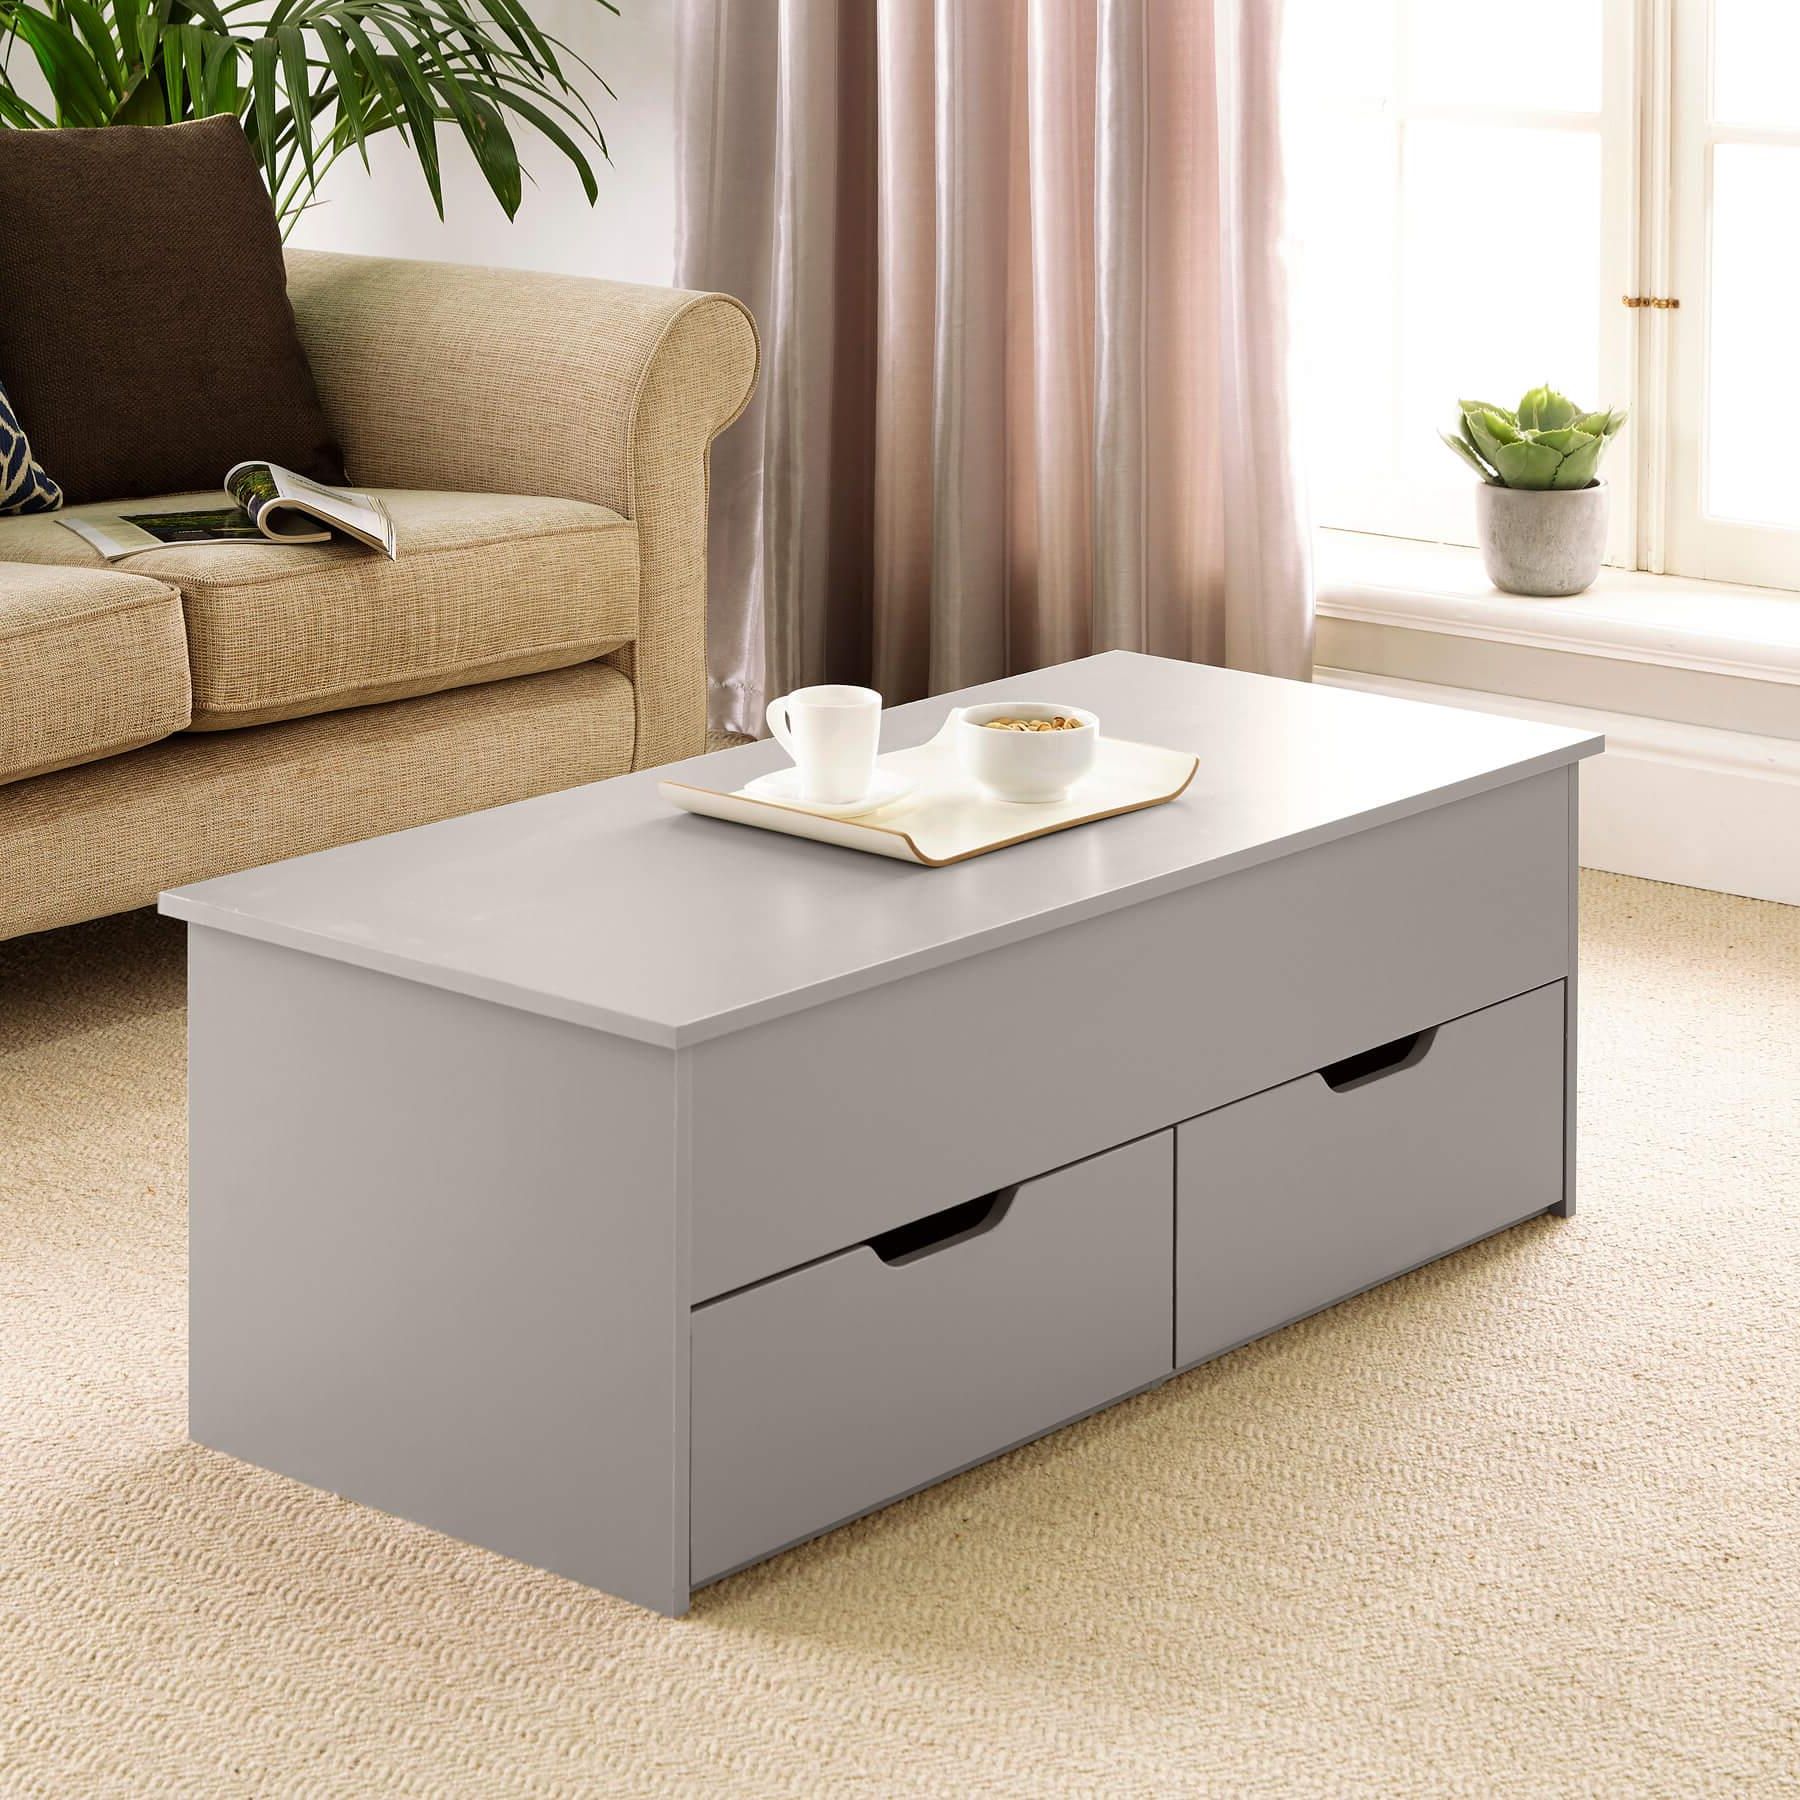 Grey Wooden Coffee Table With Lift Up Top And 2 Large Storage Drawers With 2020 Lift Top Coffee Tables With Storage Drawers (View 6 of 15)